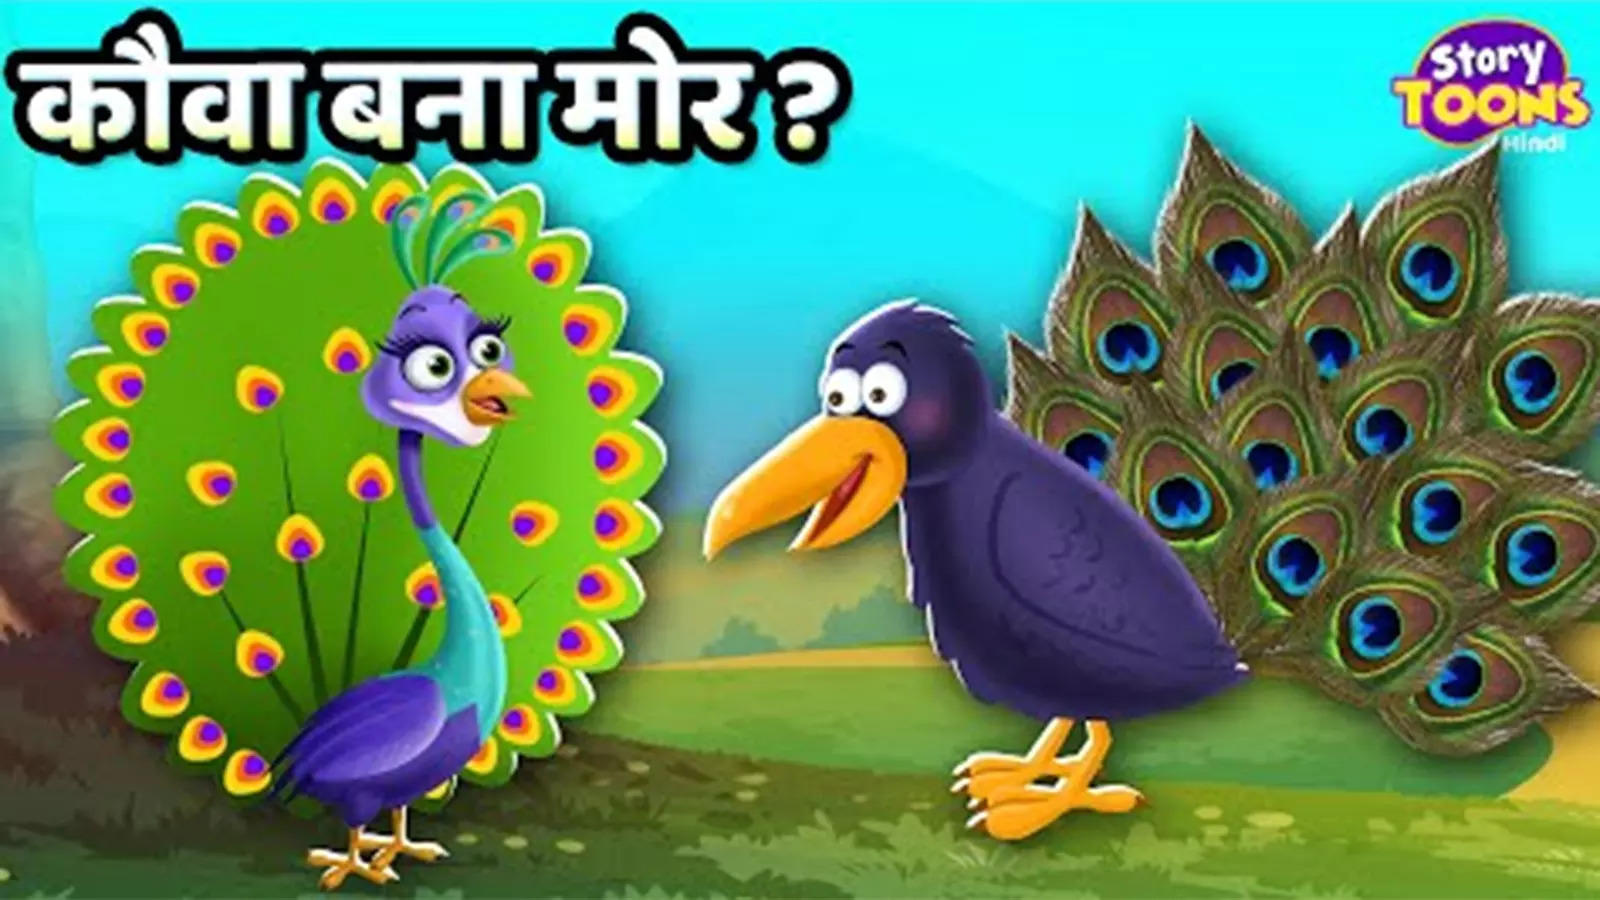 Watch Latest Children Hindi Story 'Crow Became Peacock' For Kids - Check  Out Kids's Nursery Rhymes And Baby Songs In Hindi | Entertainment - Times  of India Videos